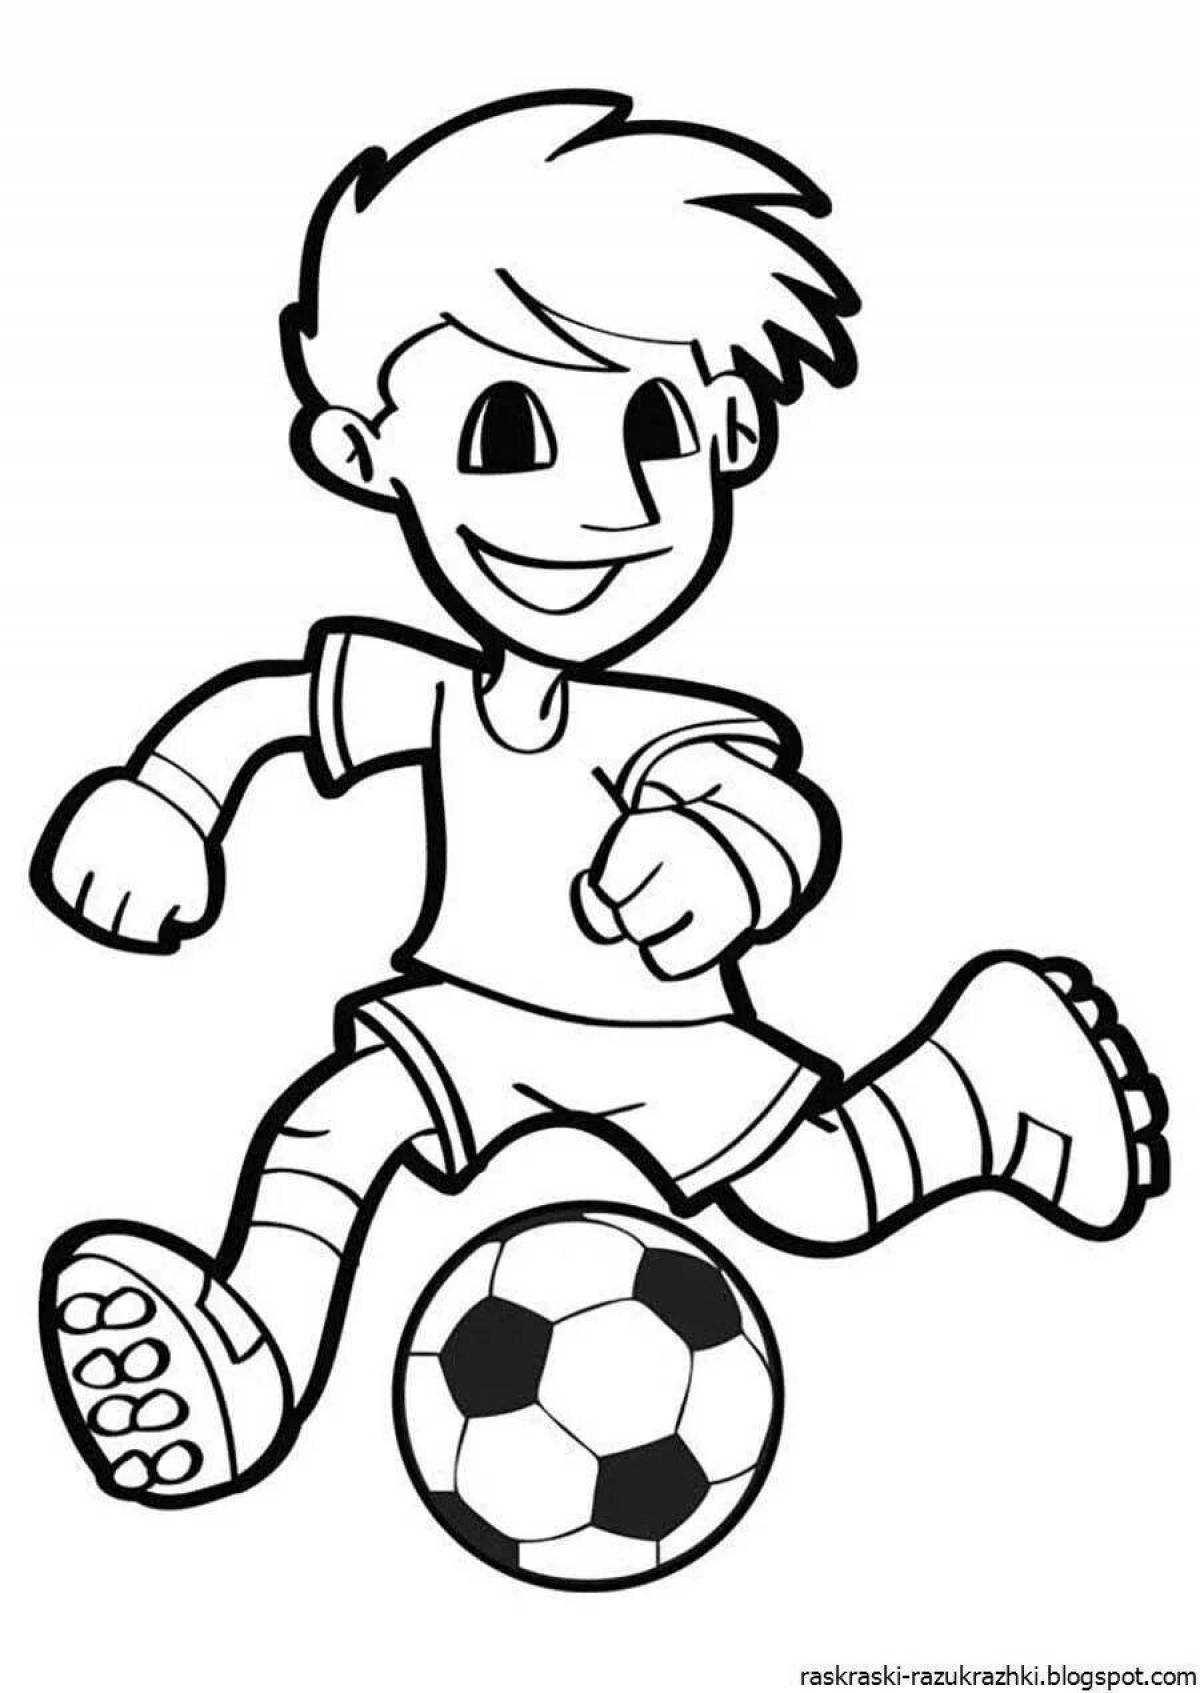 Coloring book the boy is a diligent footballer